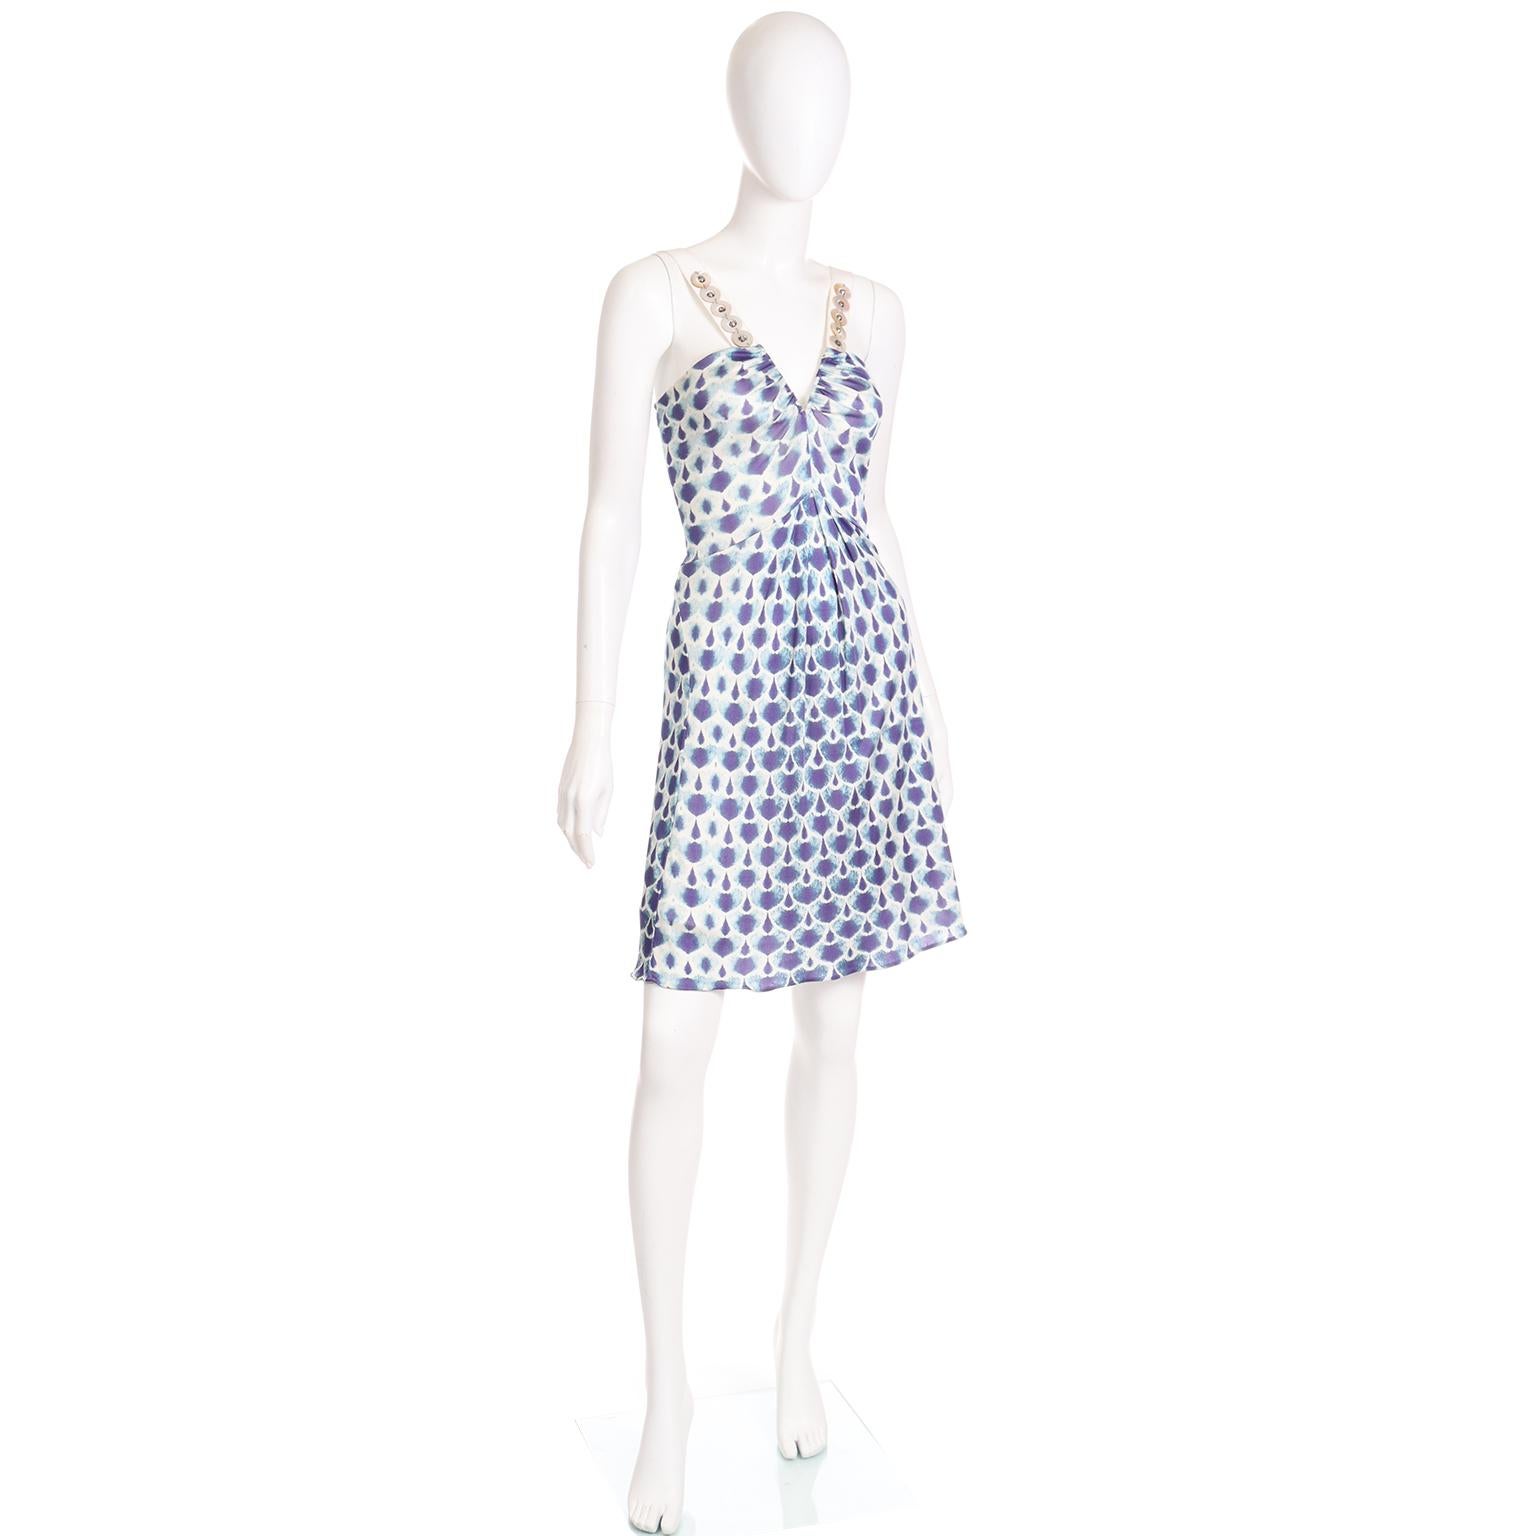 Alberta Ferretti Vintage Early 2000s Blue and White Low V Dress W Shell Details 1